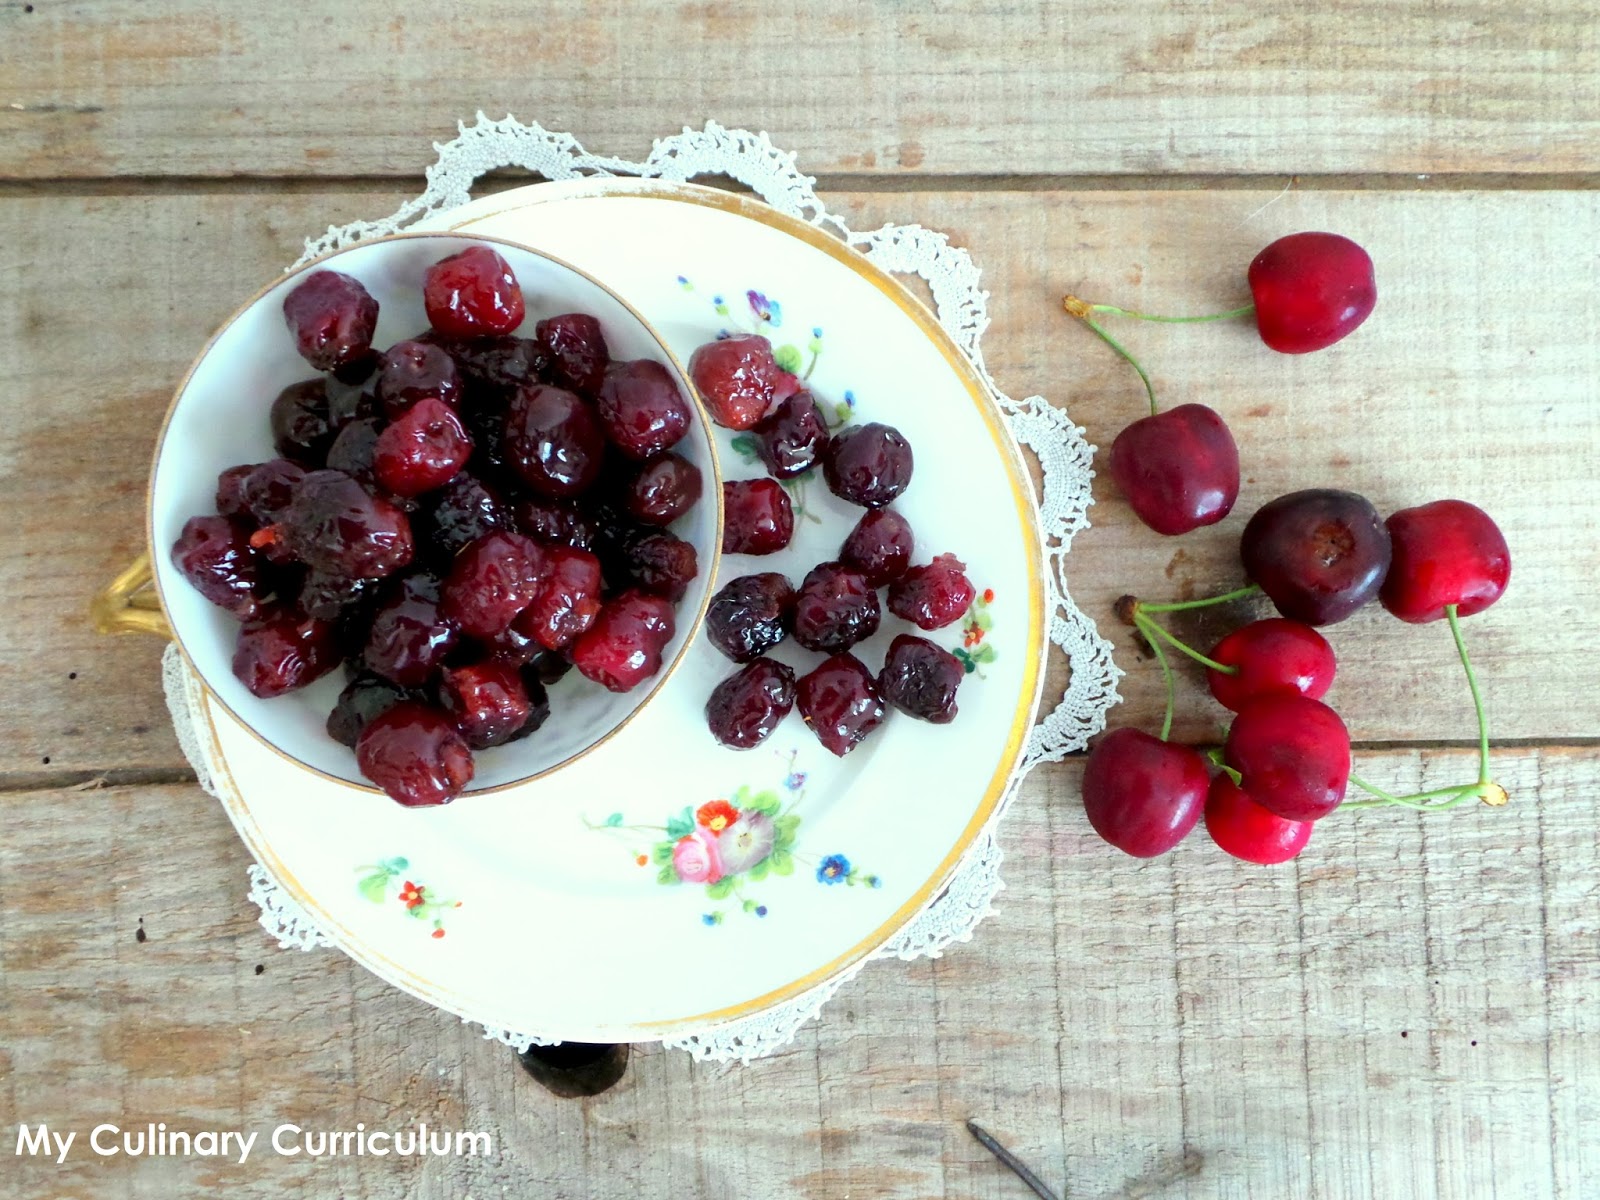 My Culinary Curriculum: Cerises confites maison (Homemade candied cherries)